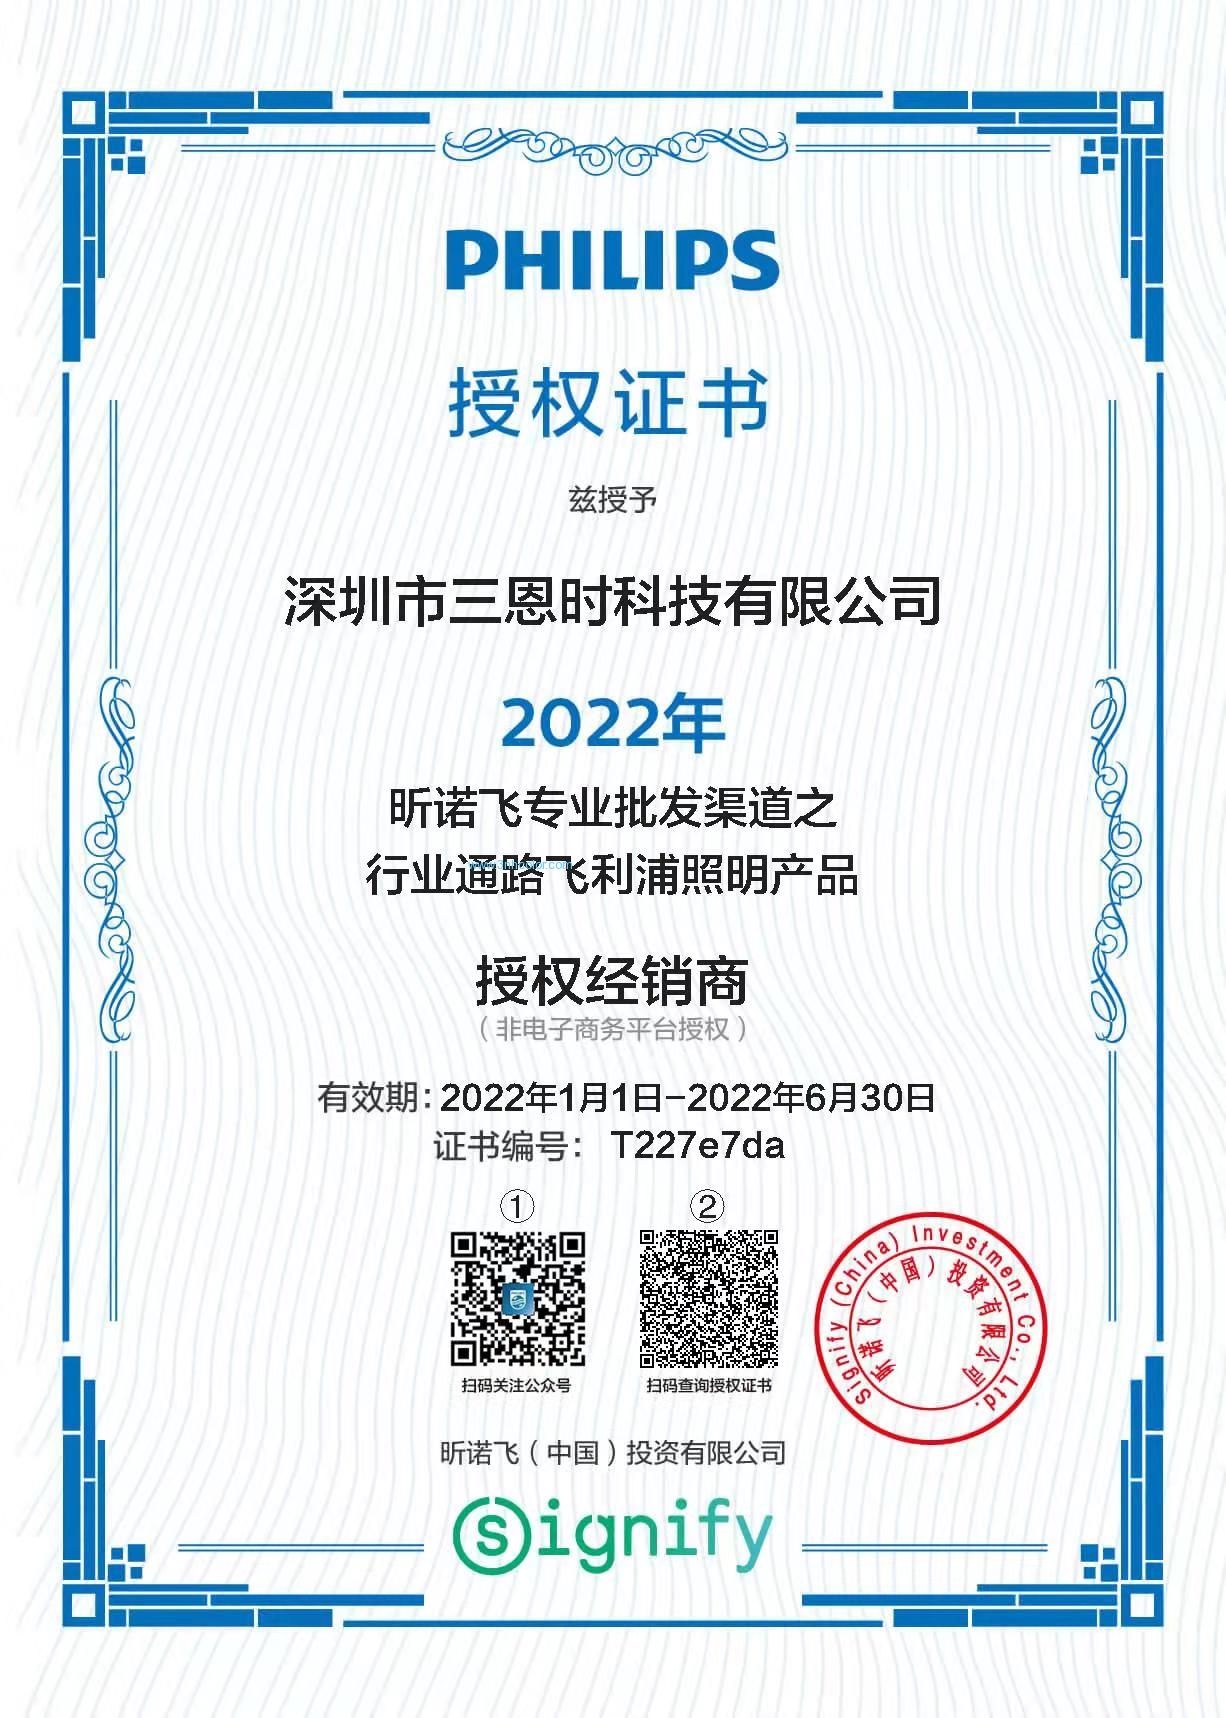 Philips Authorized Agent In China in 2022